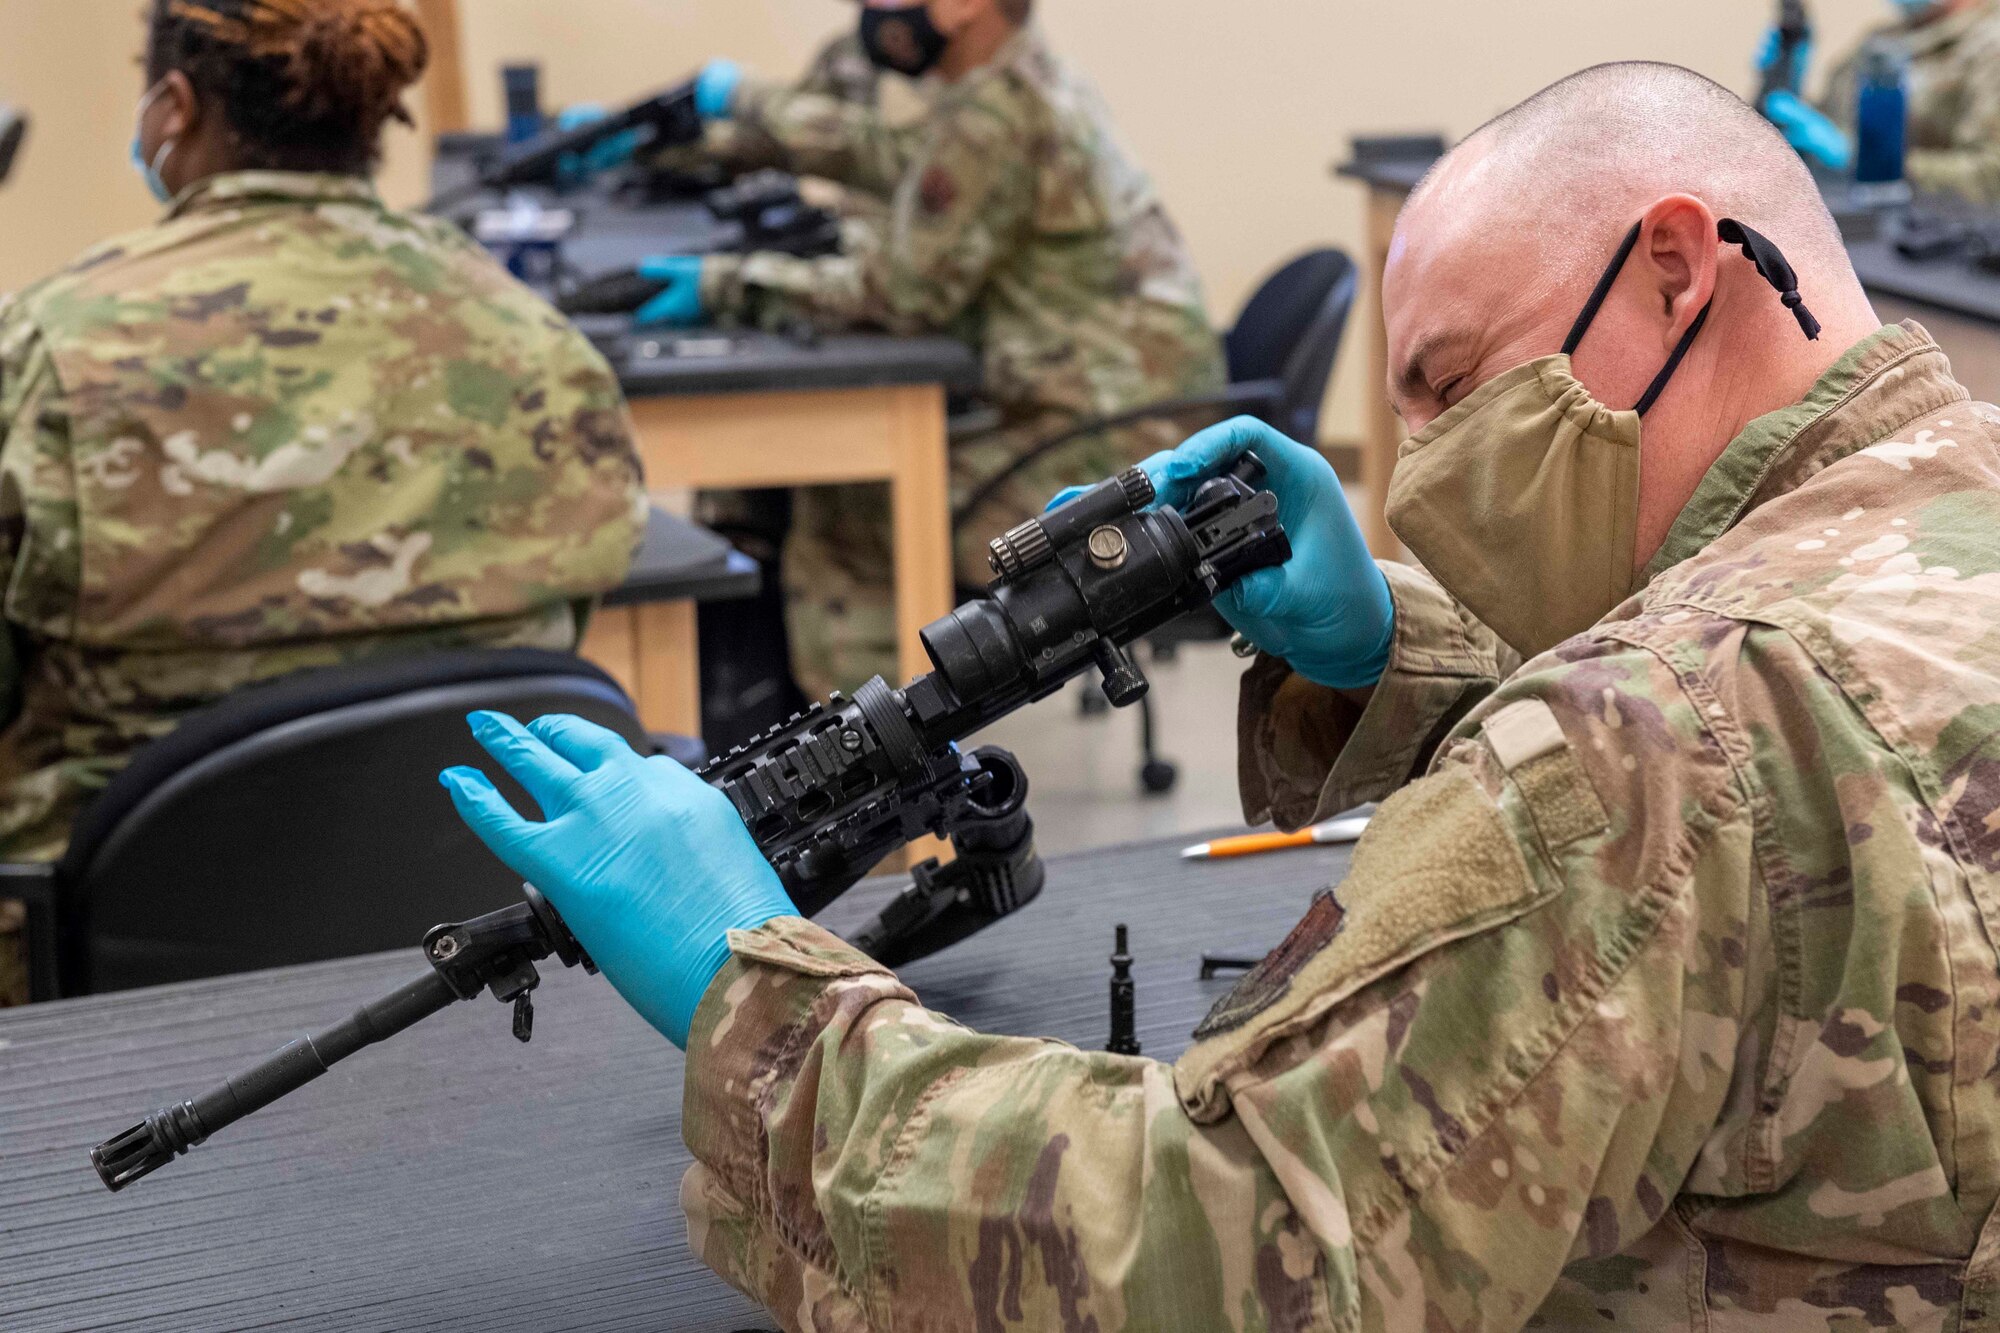 Airman examines the barrel of an M4 carbine